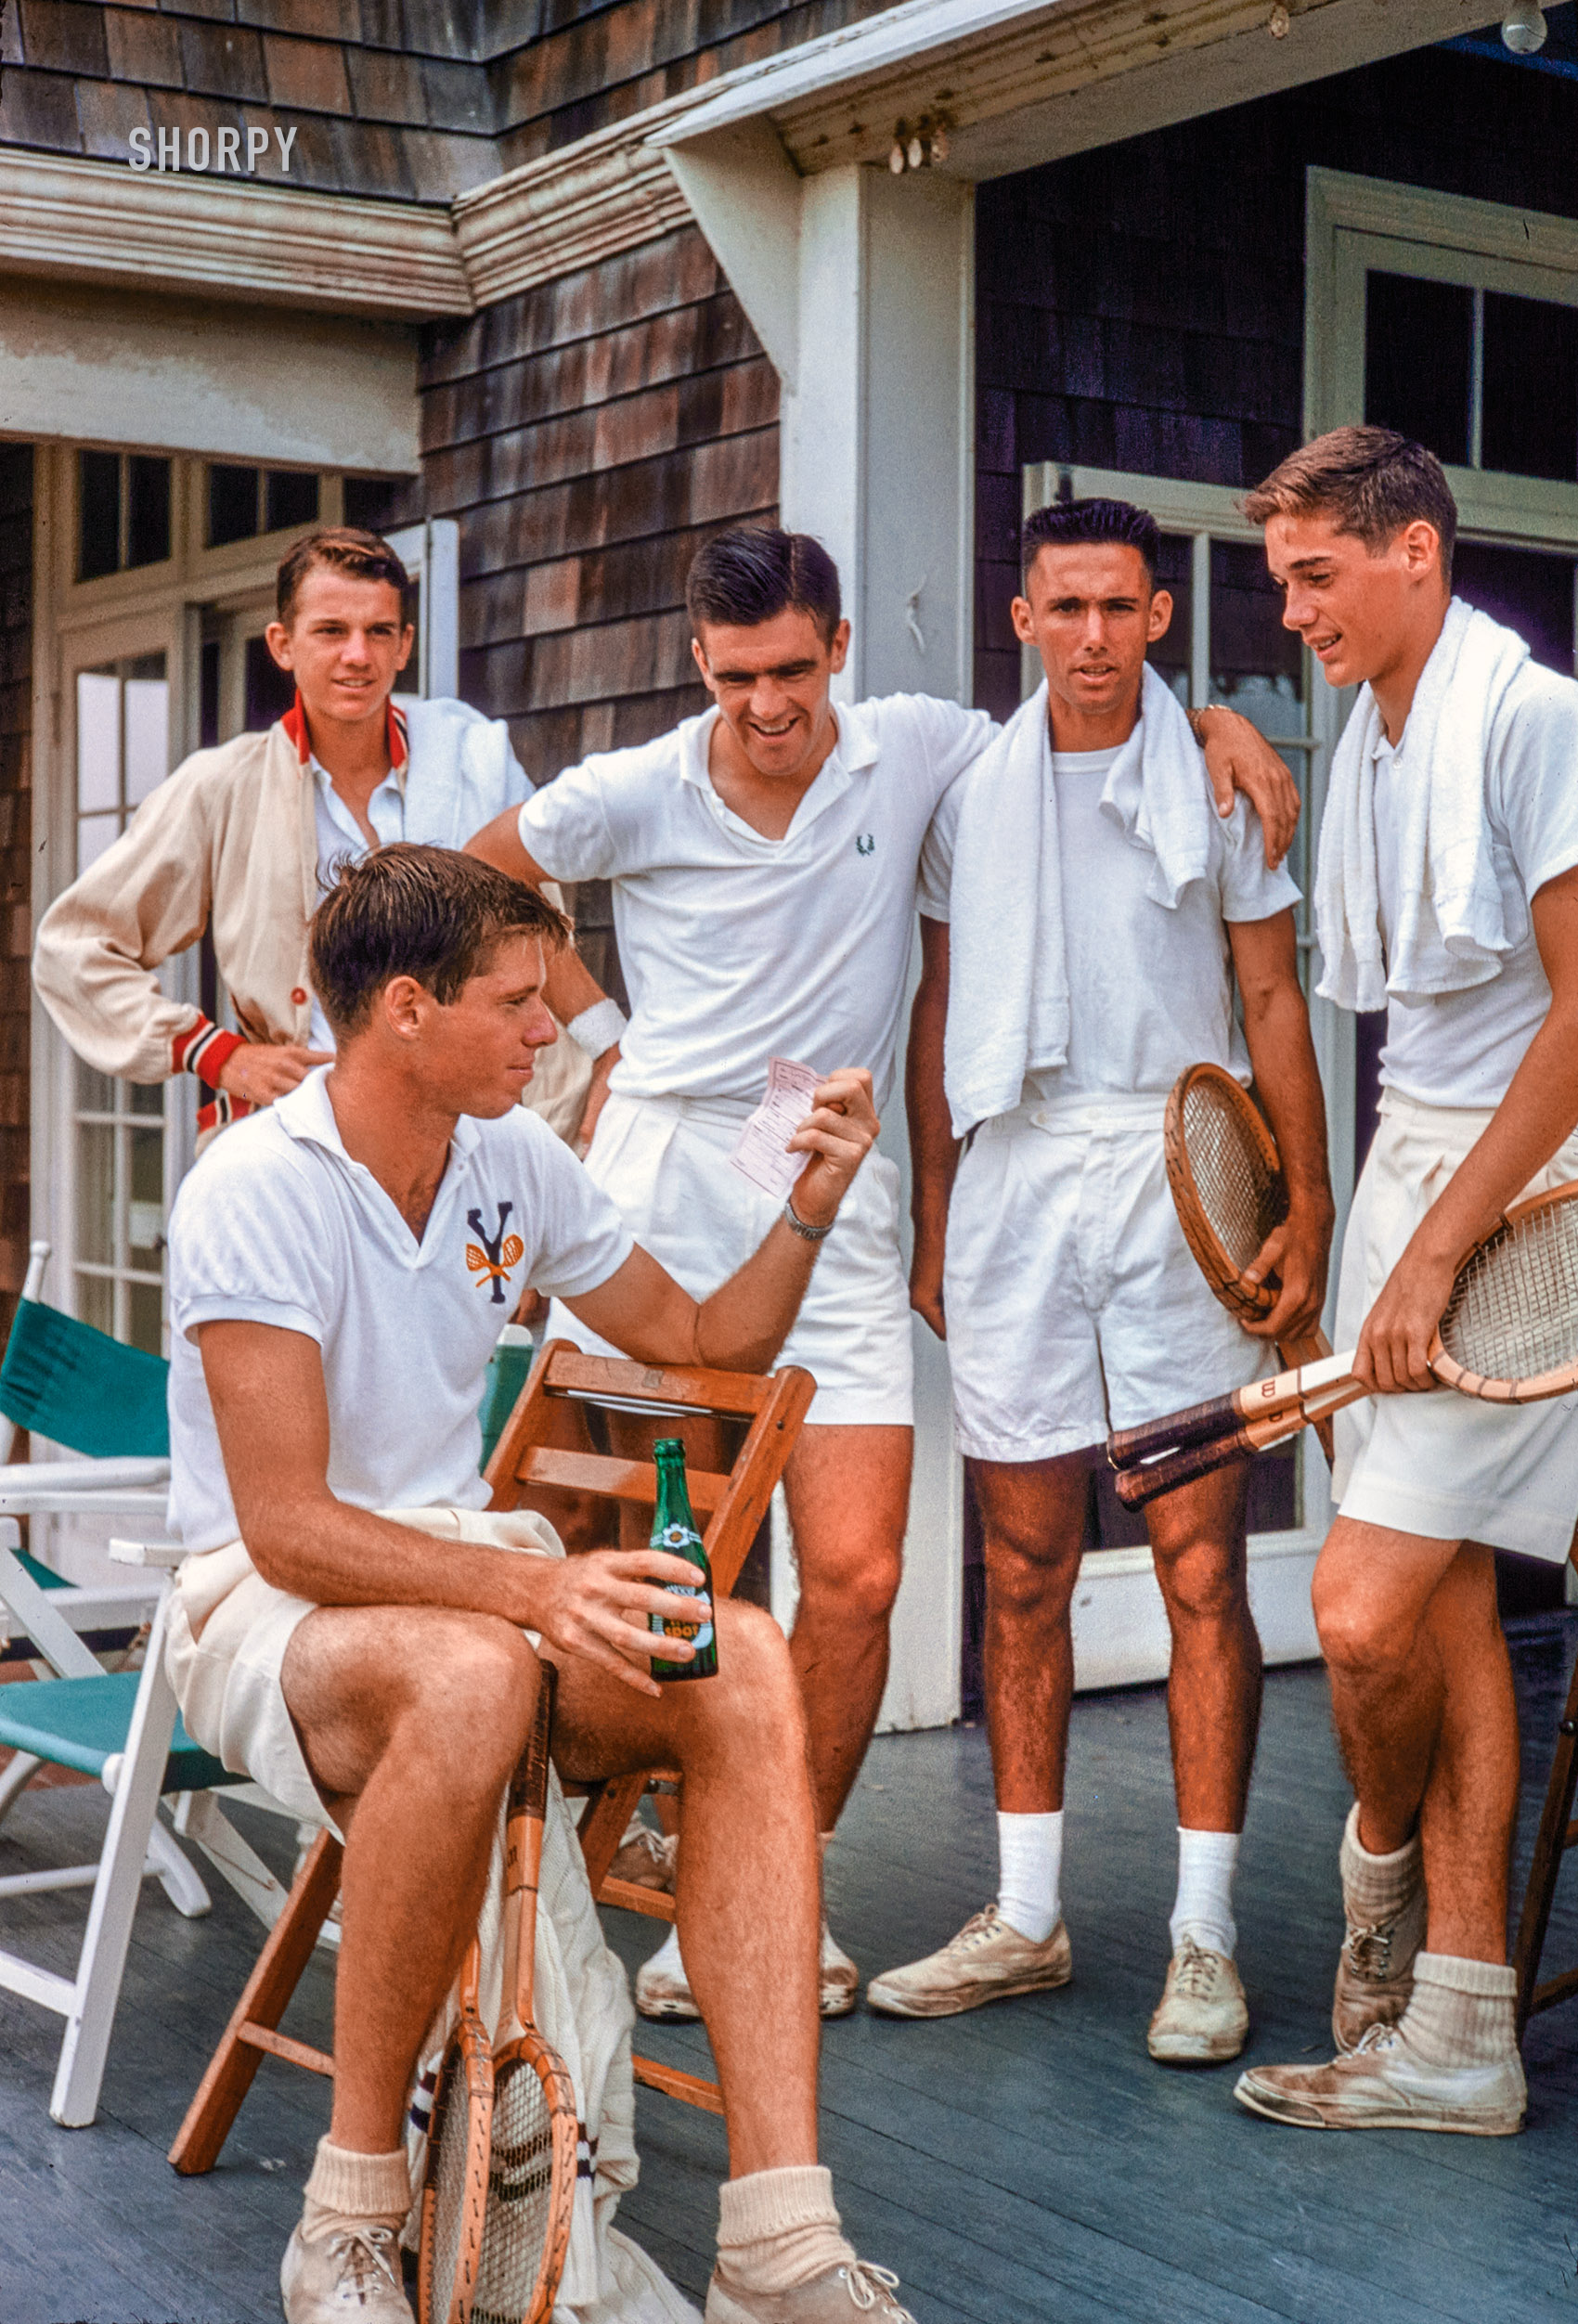 August 1955. "Tennis in the Hamptons, Long Island's chic play spot." 35mm Kodachrome by Toni Frissell for Sports Illustrated. View full size.